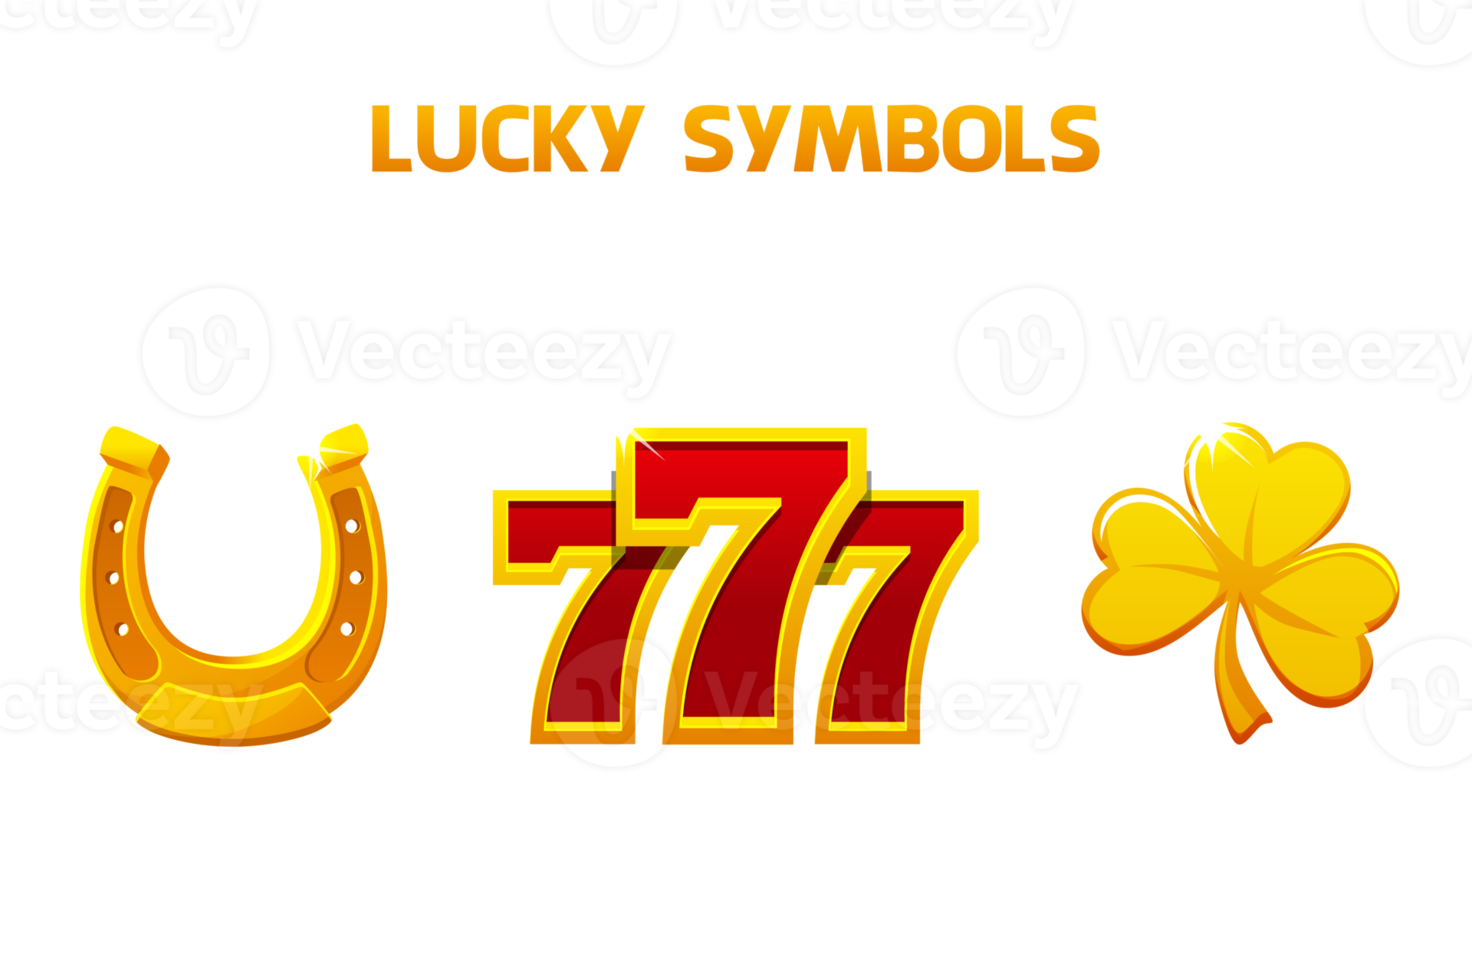 Lucky symbols - seven, clover and horseshoe. Golden icons for slots and casino game. Ui element for jackpot in gambling. png